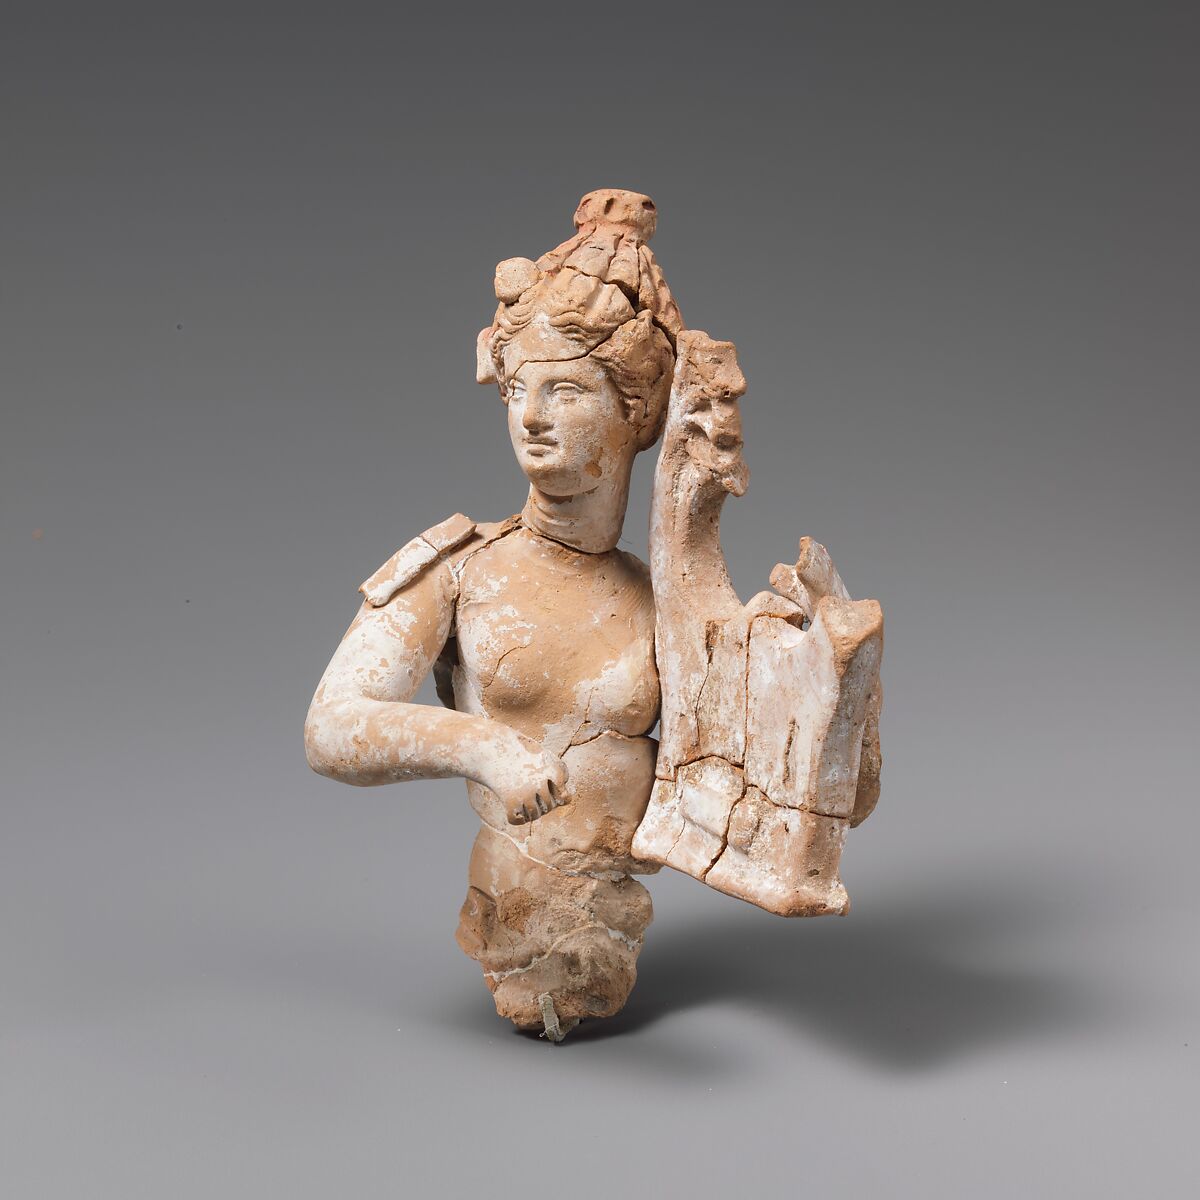 Fragmentary terracotta statuette of a woman with a kithara, Terracotta, Greek, South Italian, Tarentine 